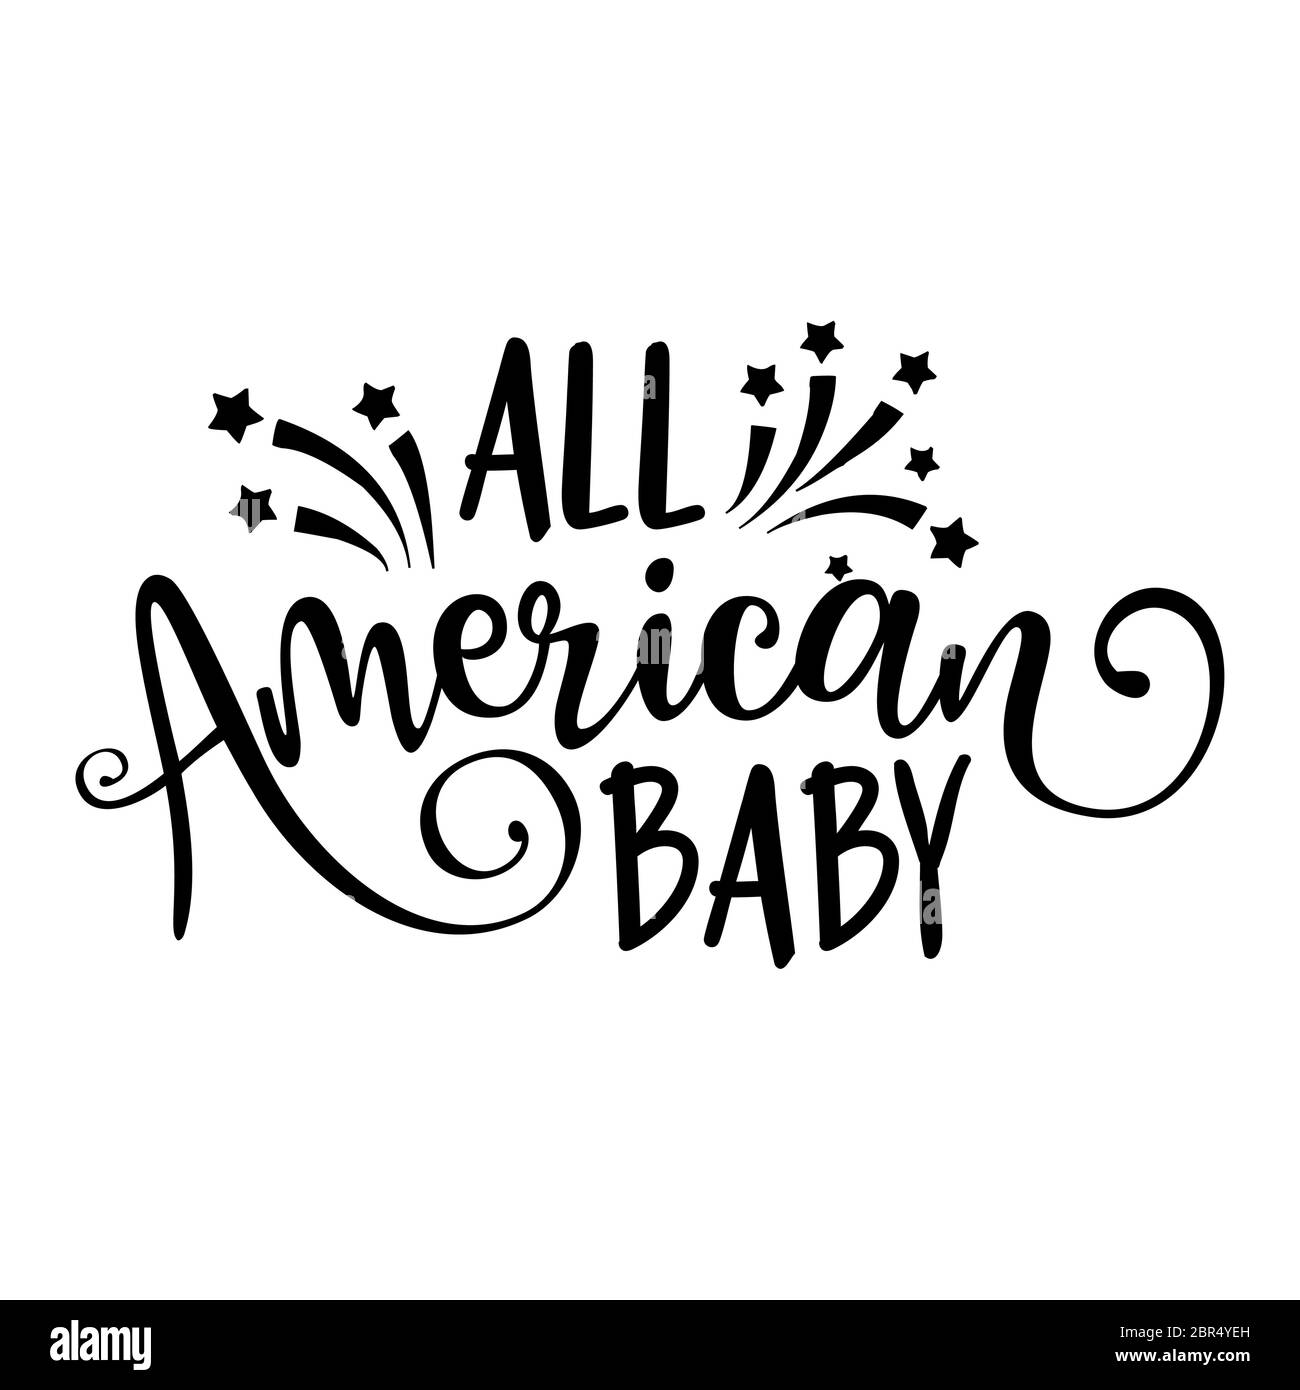 All american baby - Happy Independence Day July 4 lettering design illustration. Good for advertising, poster, announcement, invitation, party, greeti Stock Vector